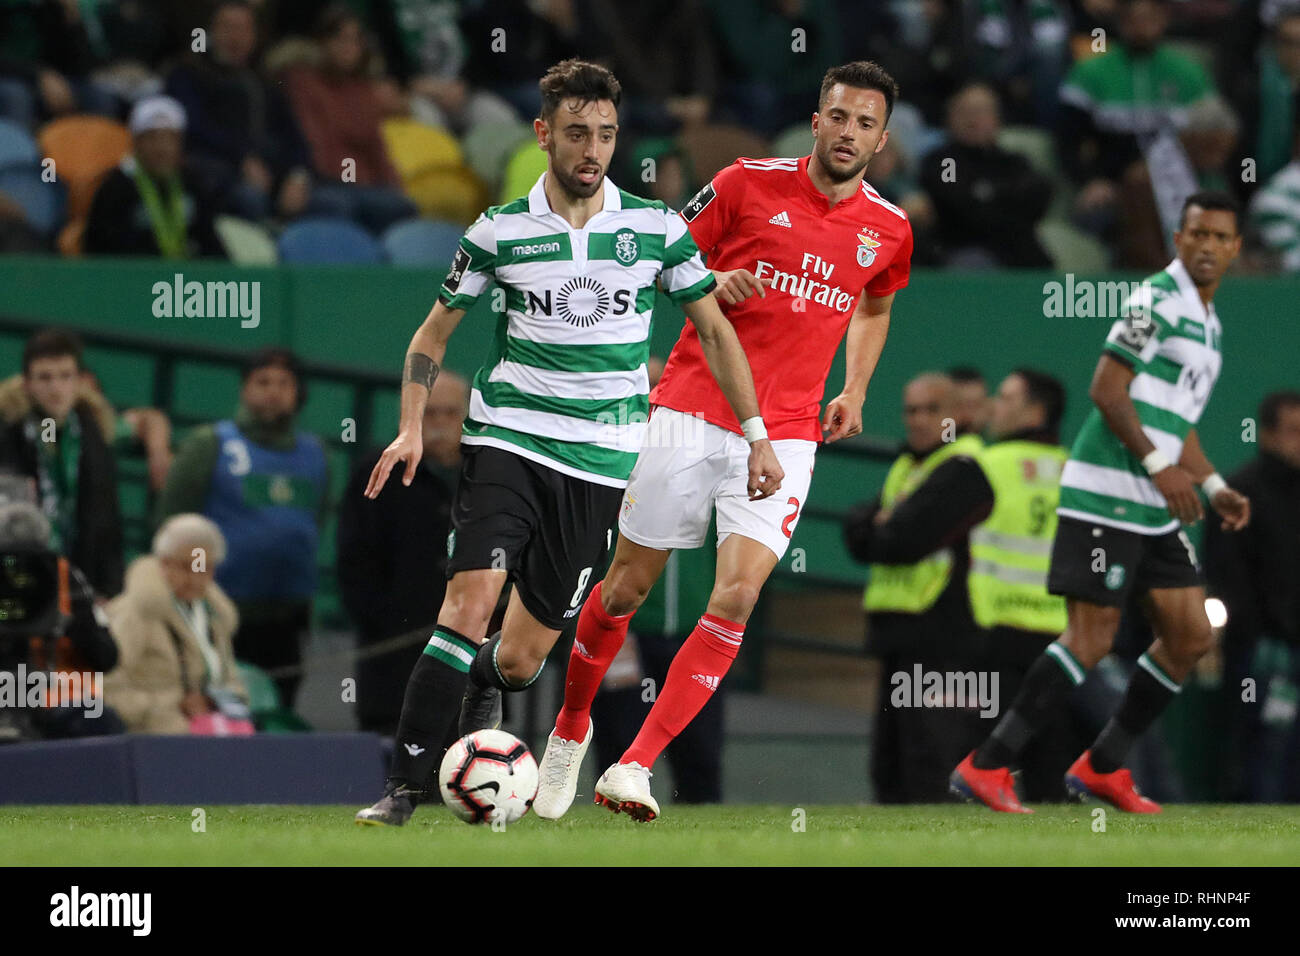 Lisbon, Portugal. 03rd Feb, 2019. Bruno Fernandes of Sporting CP (L) vies for the ball with Andreas Samaris of SL Benfica (R) during the League NOS 2018/19 footballl match between Sporting CP vs SL Benfica.  (Final score: Sporting CP 2 - 4 SL Benfica) Credit: SOPA Images Limited/Alamy Live News Stock Photo